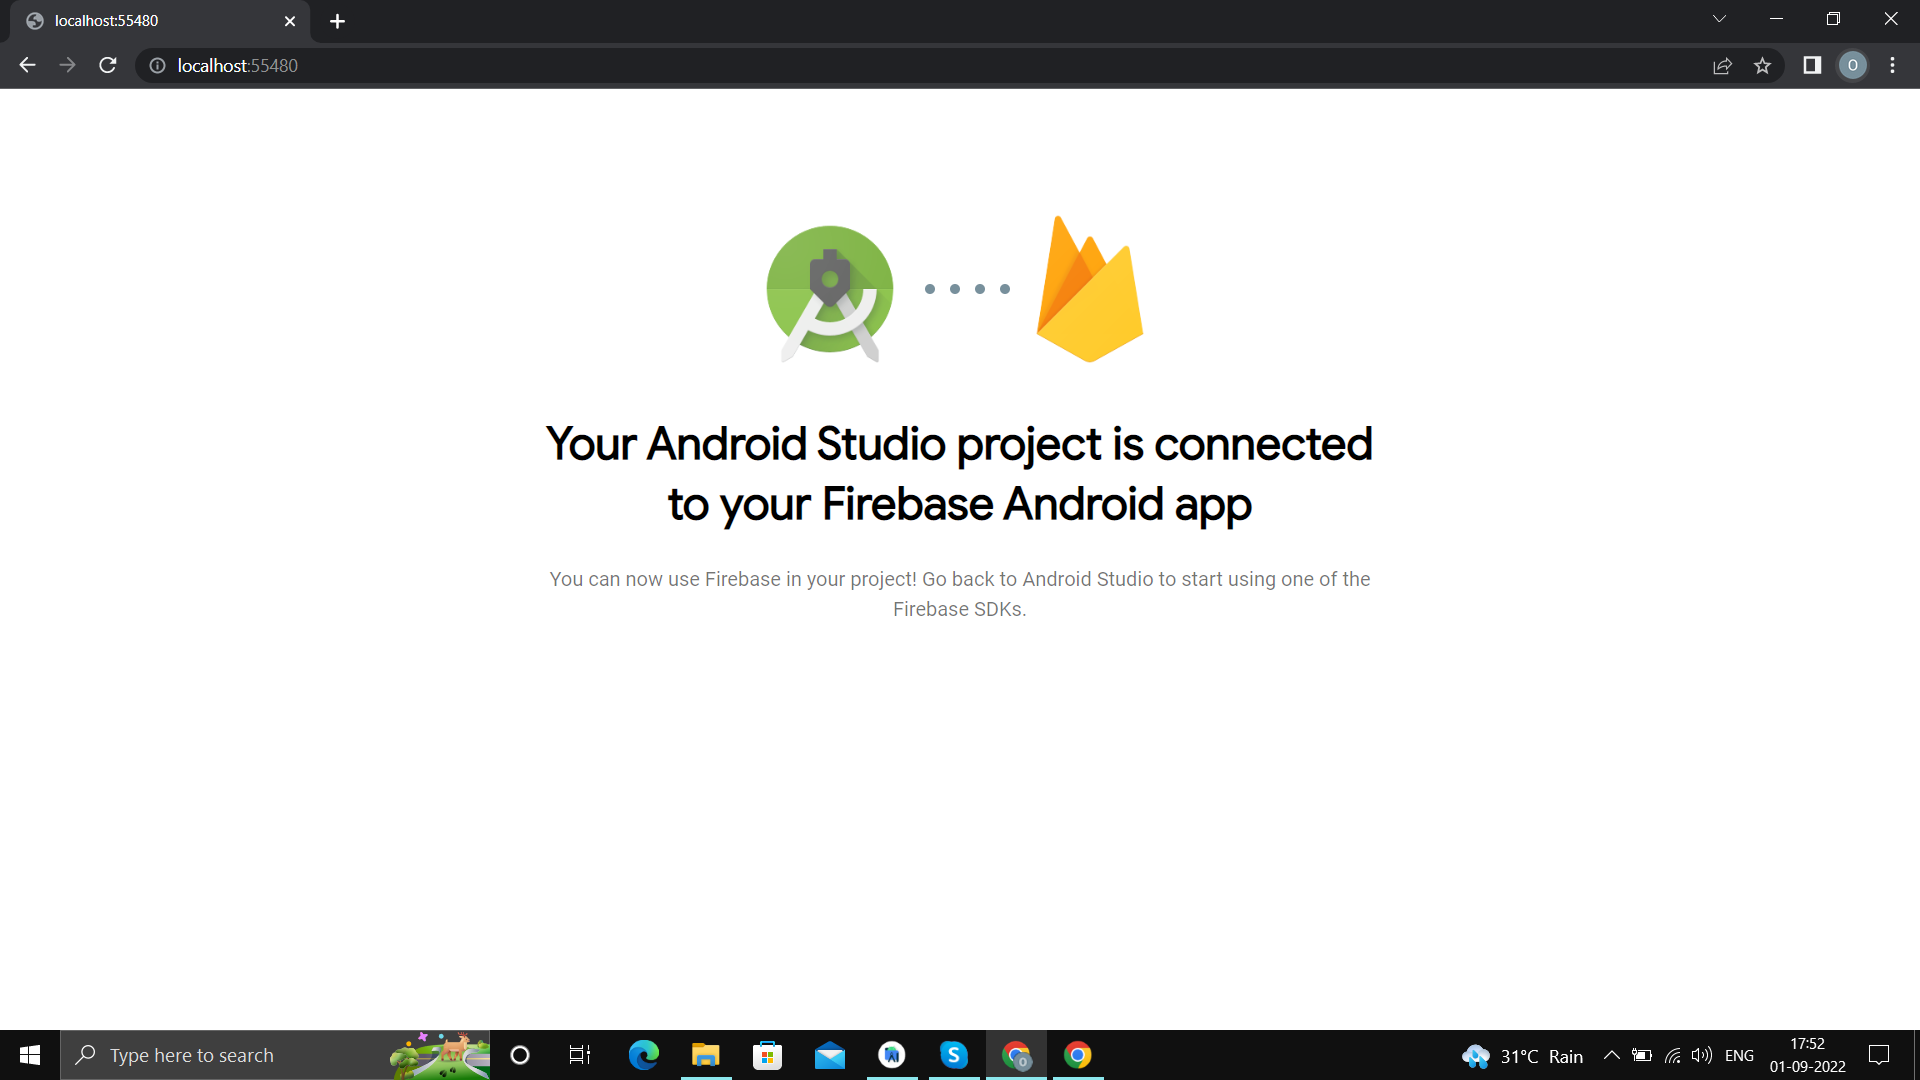 Android Studio project and Firebase are connected